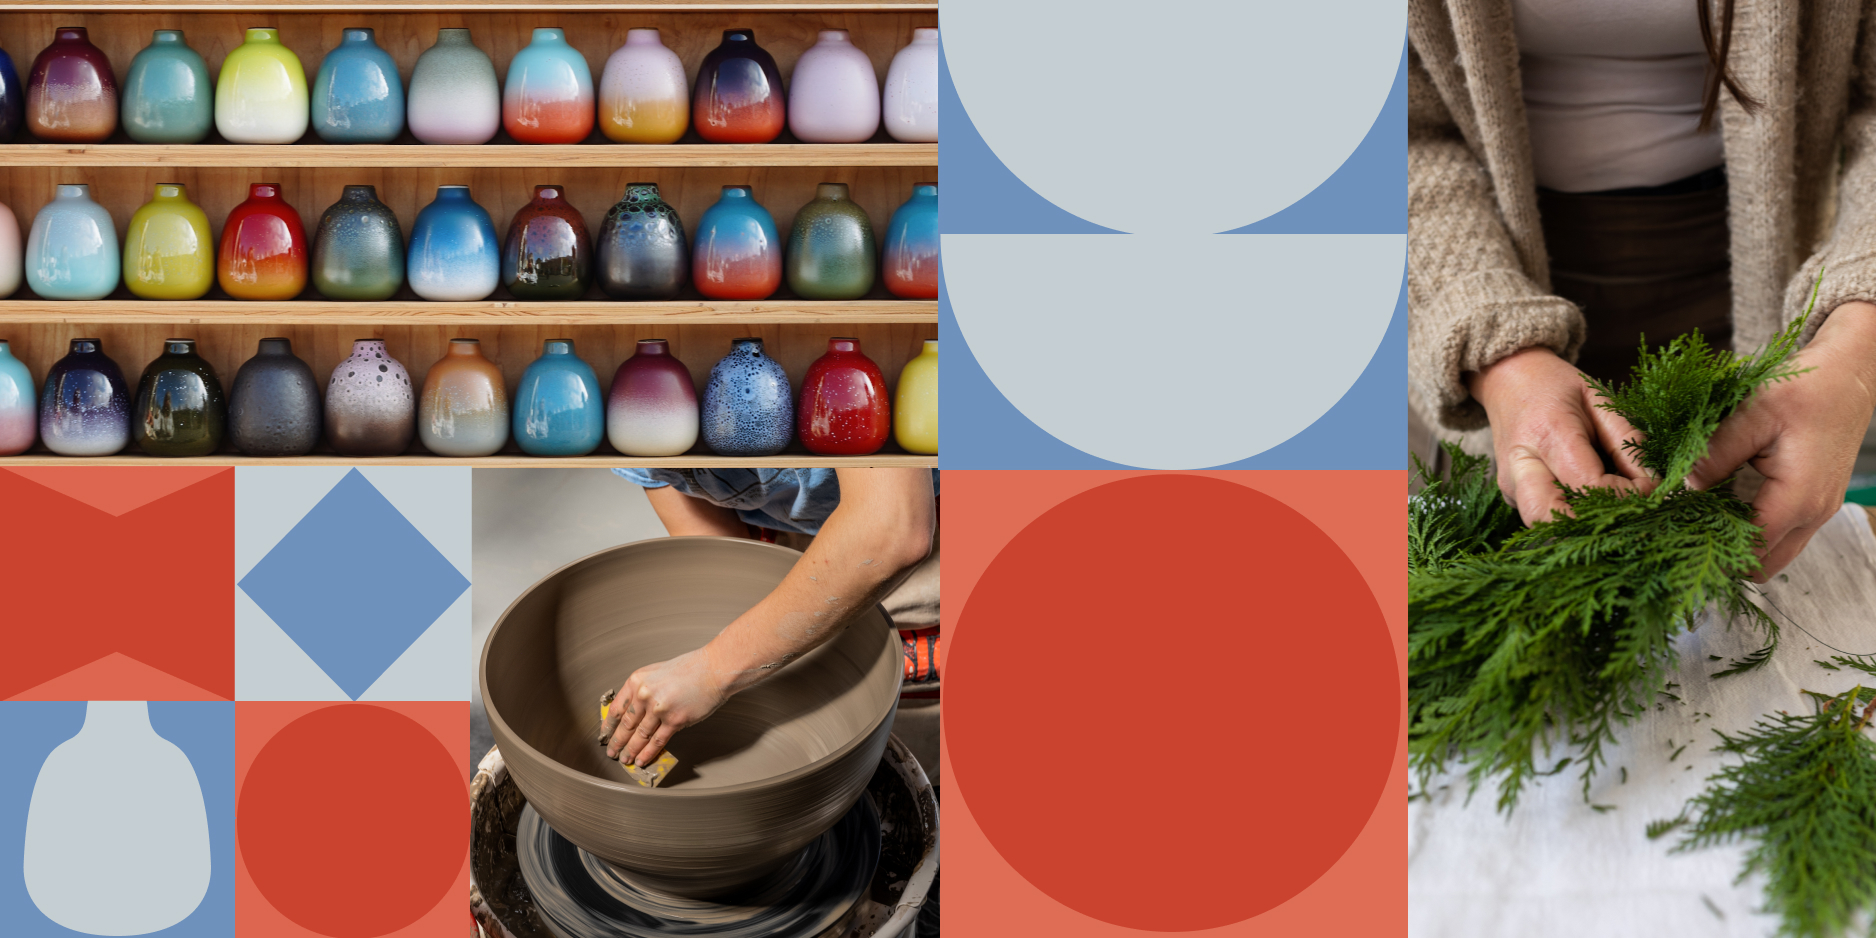 A visual that includes a person's hands making a clay pot, three shelves of colorful vases and graphic colored circles.